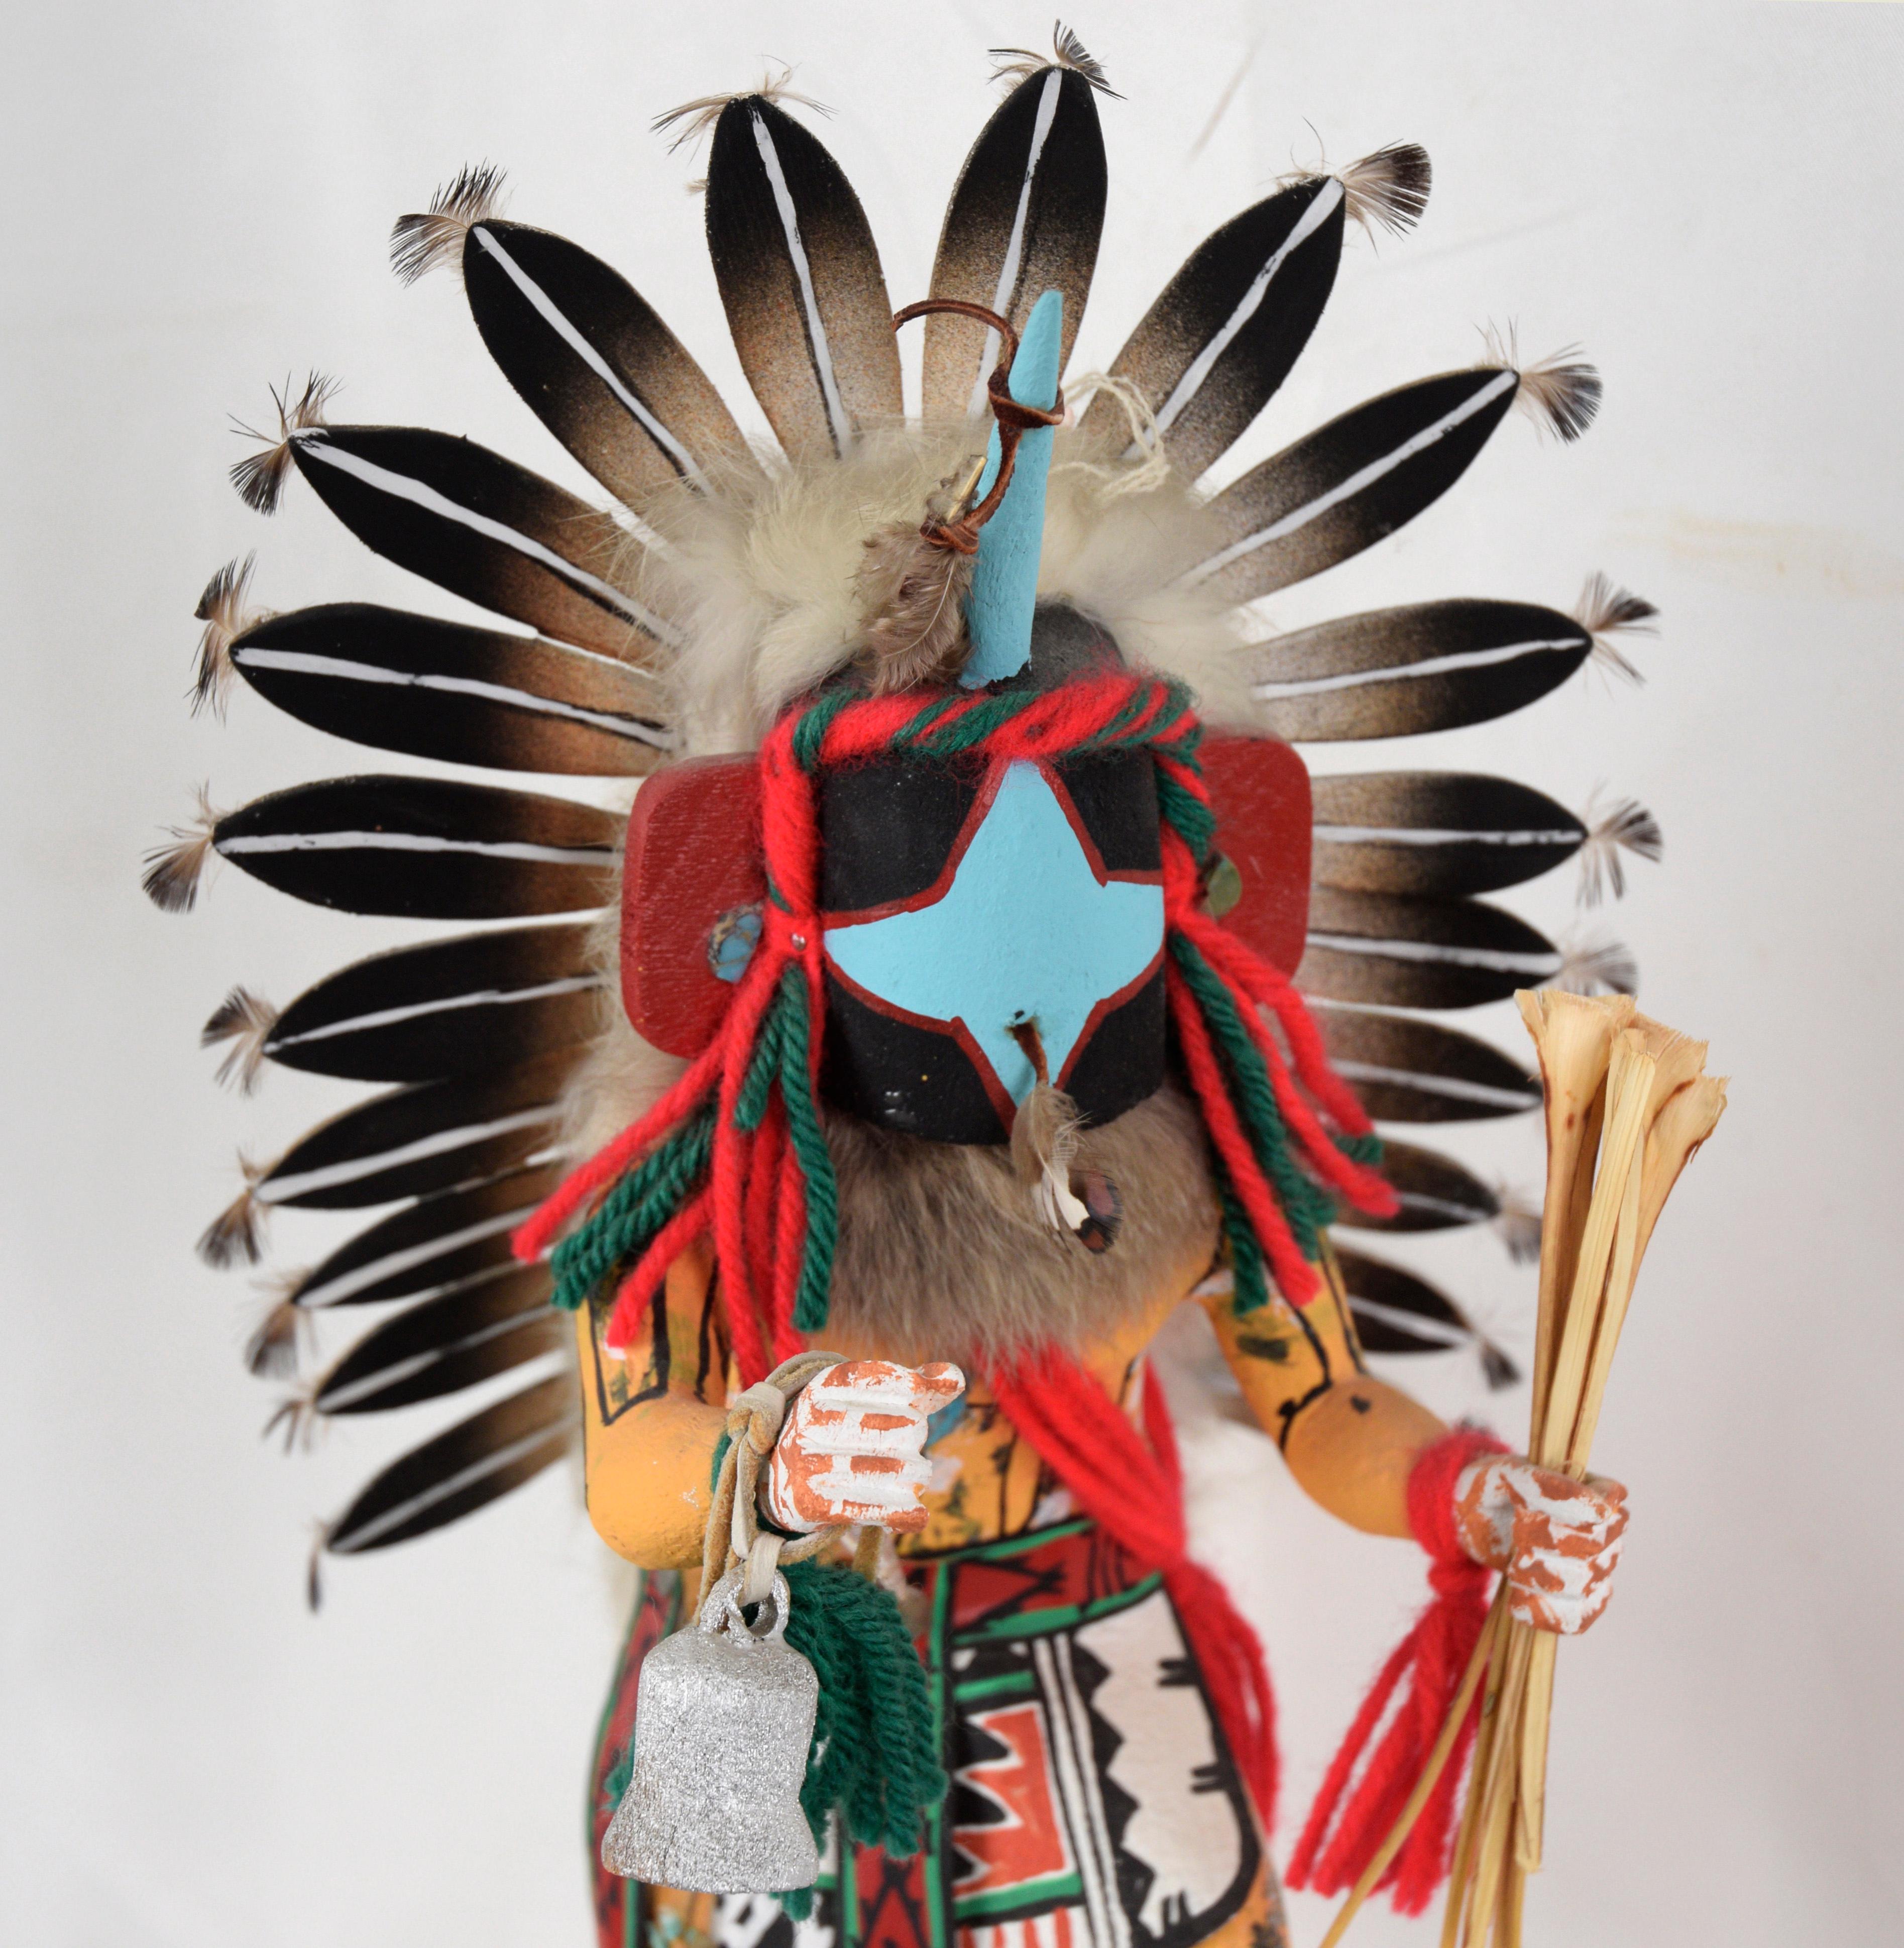 Chasing Star Performing a Dance - Kachina Doll by Rena Jean (Whitehorse)

Brightly painted, dynamic sculpture by Rena W. Jean ( Rena Whitehorse Jean) Hopi. The figure is dressed in ornate clothing, holding a bell and a bundle of yucca sticks. There